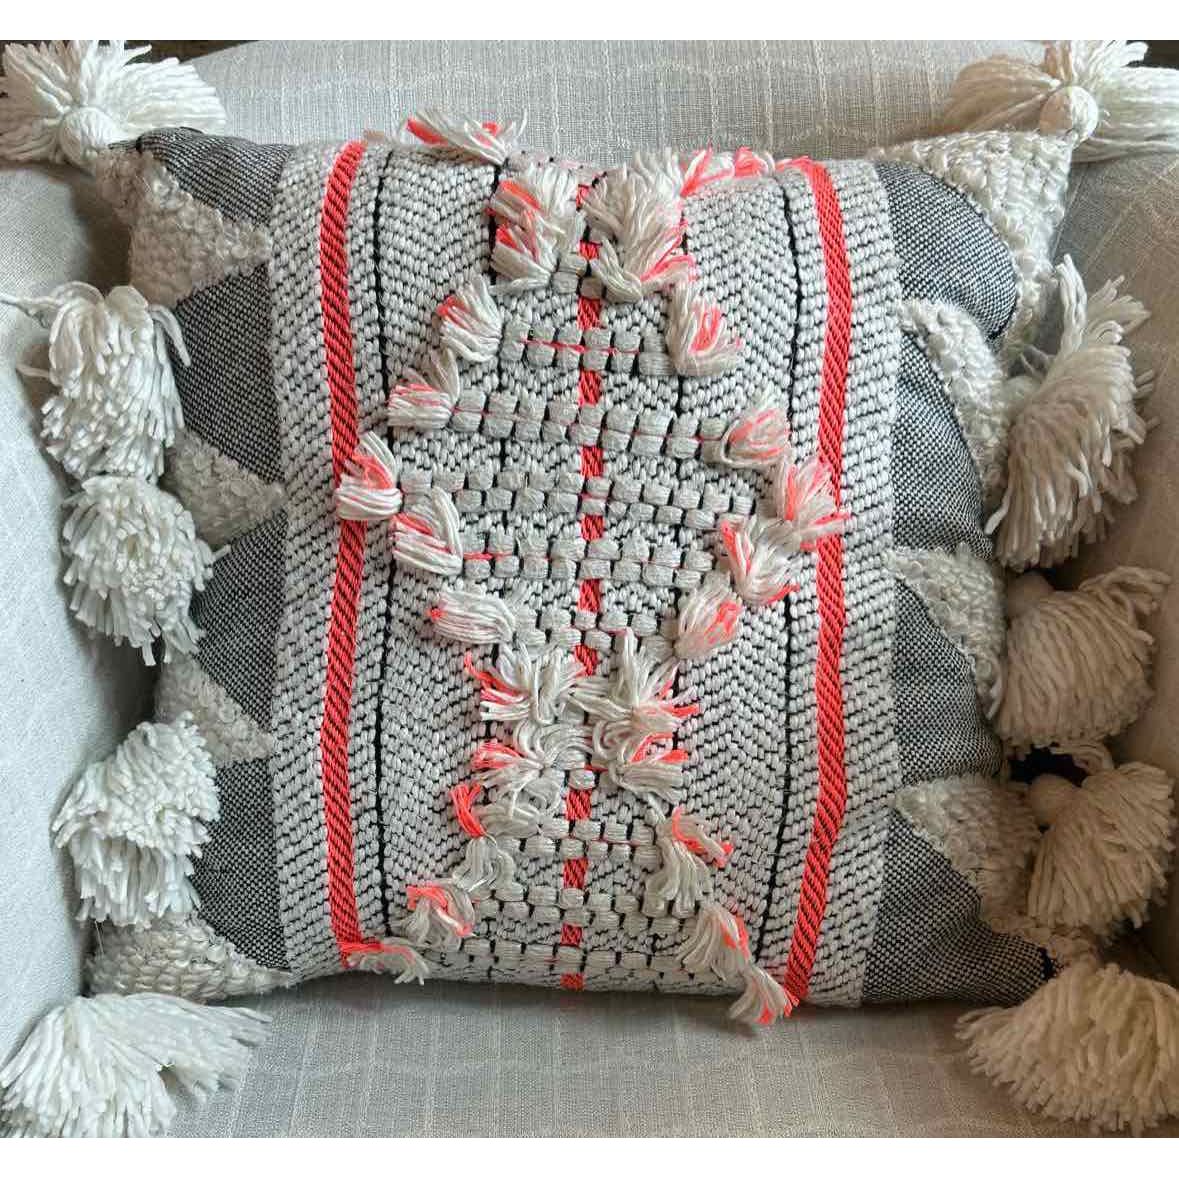 Square Grey & Neon orange Pillow with Tassels